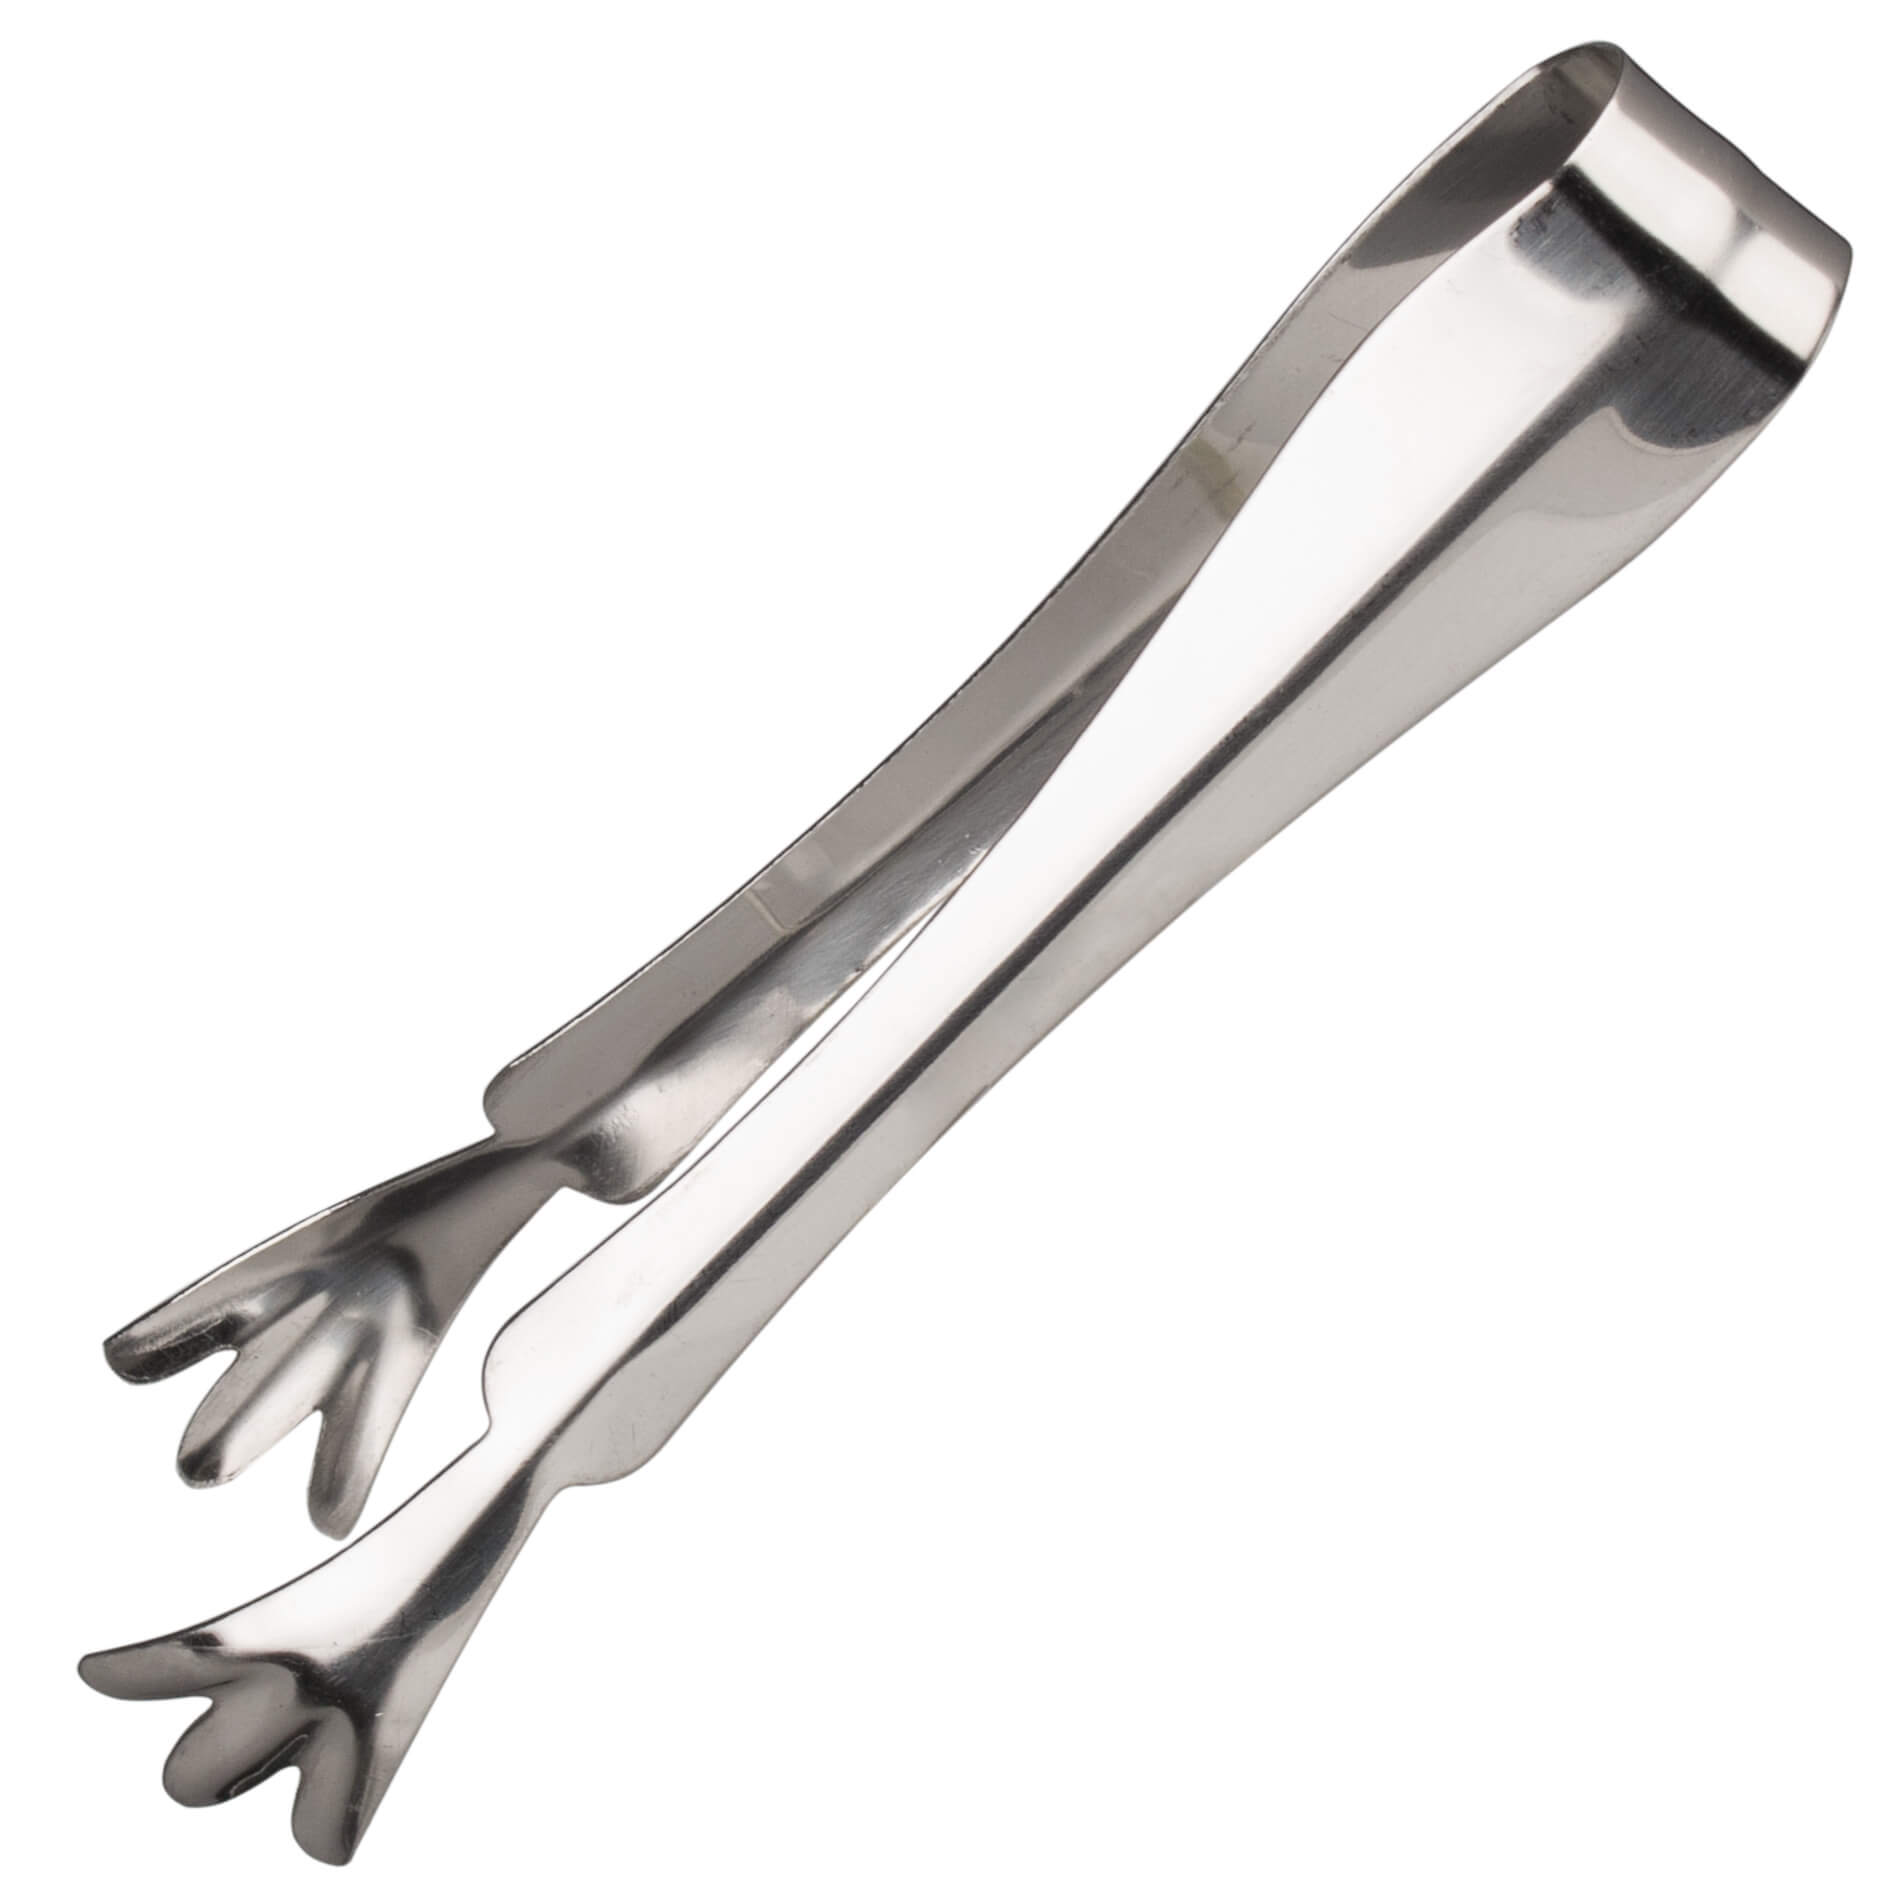 Tongs Chicken Feet Prime Bar - silver-colored (17cm)